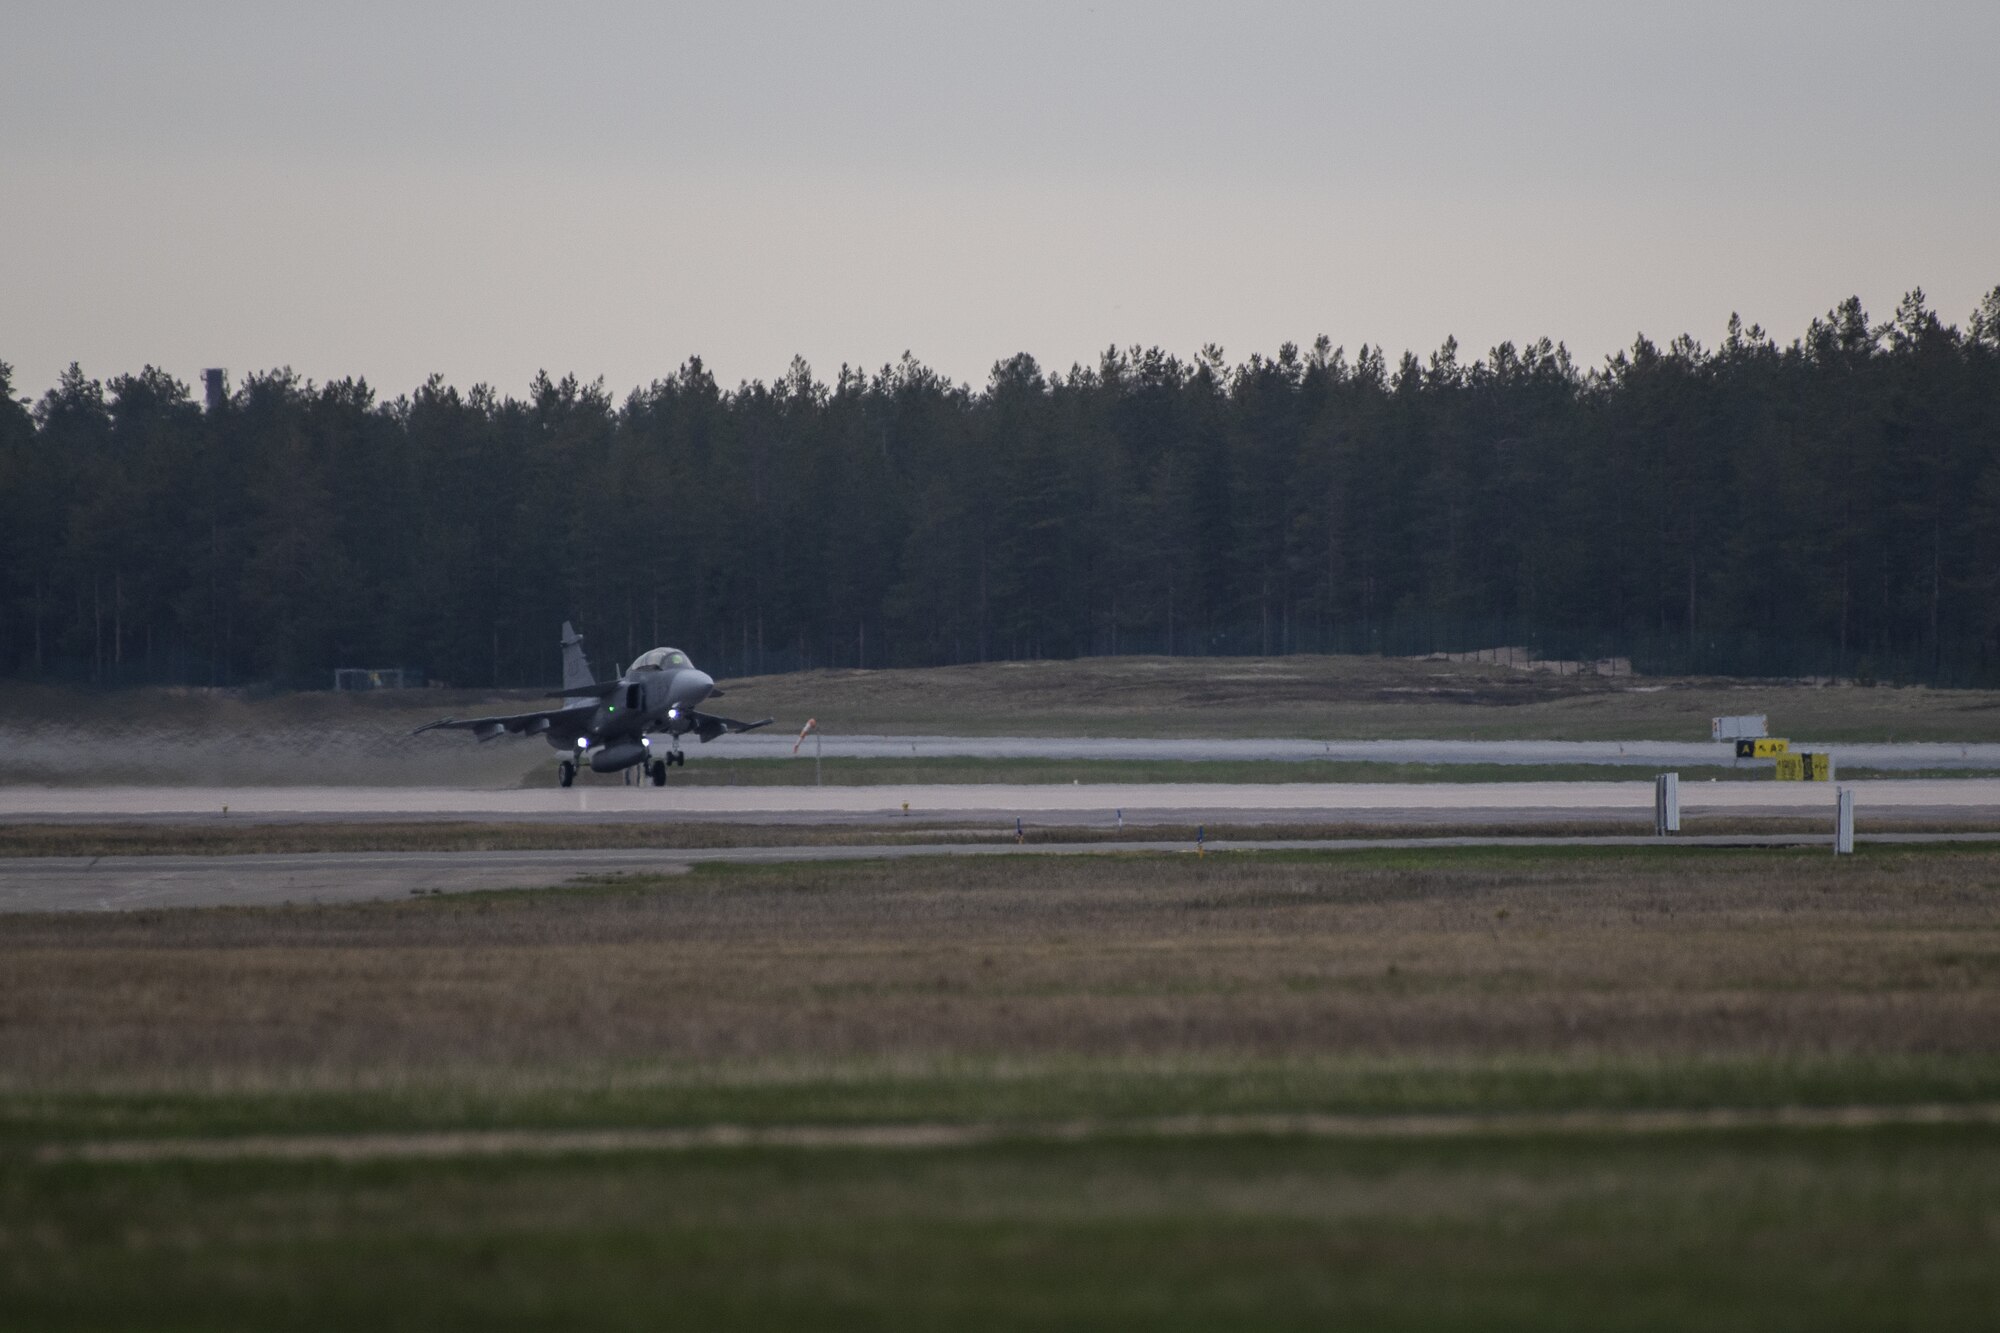 A U.S. Air Force F-16 Fighting Falcon from the 480th Fighter Squadron at Spangdahlem Air Base, Germany, takes off from the runway at Kallax Air Base, Sweden, May 19, 2021. Airmen from the 52nd FW deployed to Sweden two weeks prior to the start of Arctic Challenge Exercise 2021 in order to maximize training operations with the Swedish air force during Spangdahlem's flightline repairs. (U.S. Air Force photo by Senior Airman Ali Stewart)